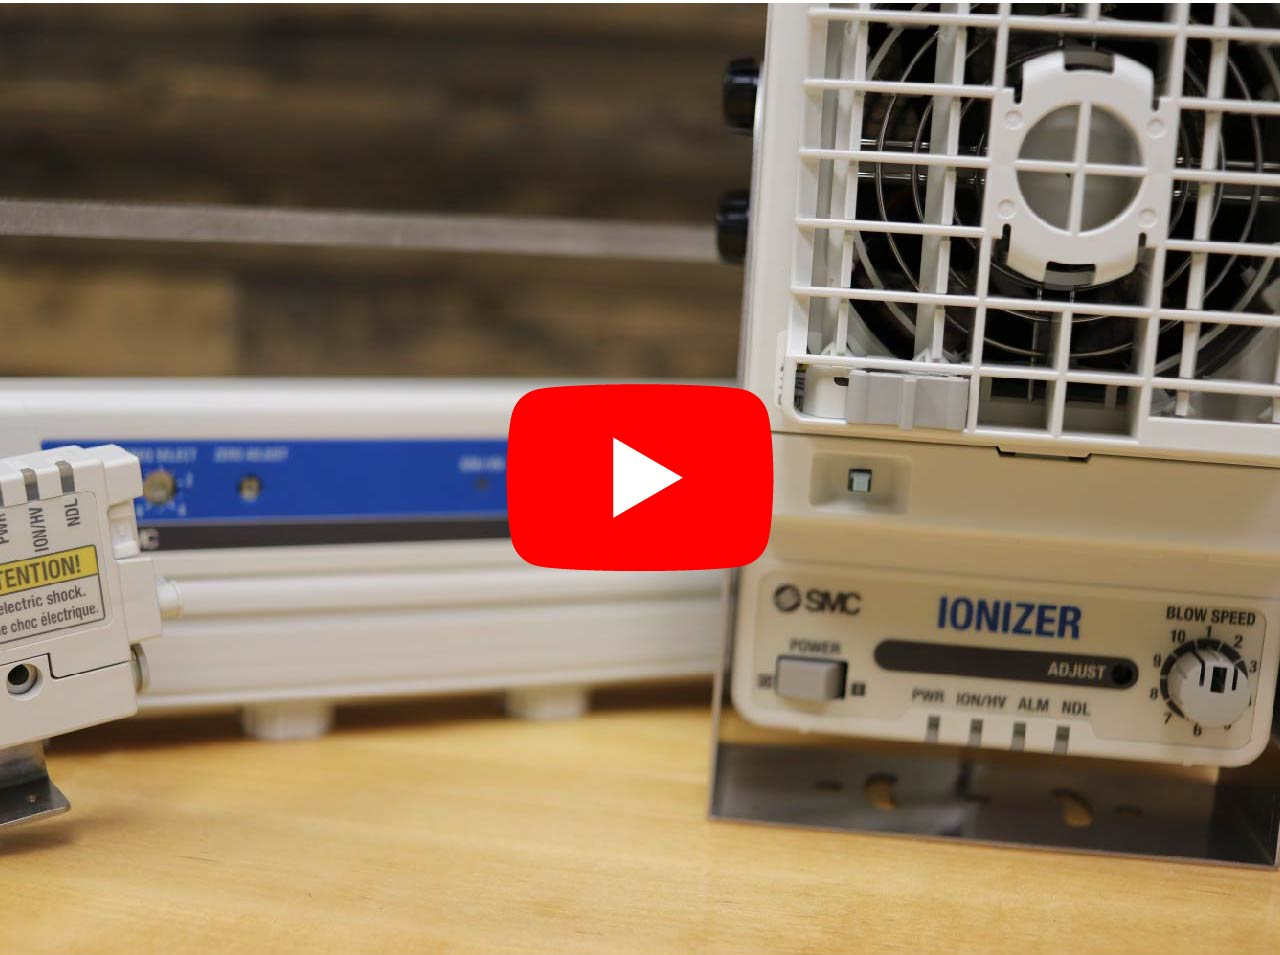 Learn How SMC Ionizers Work - Demonstration